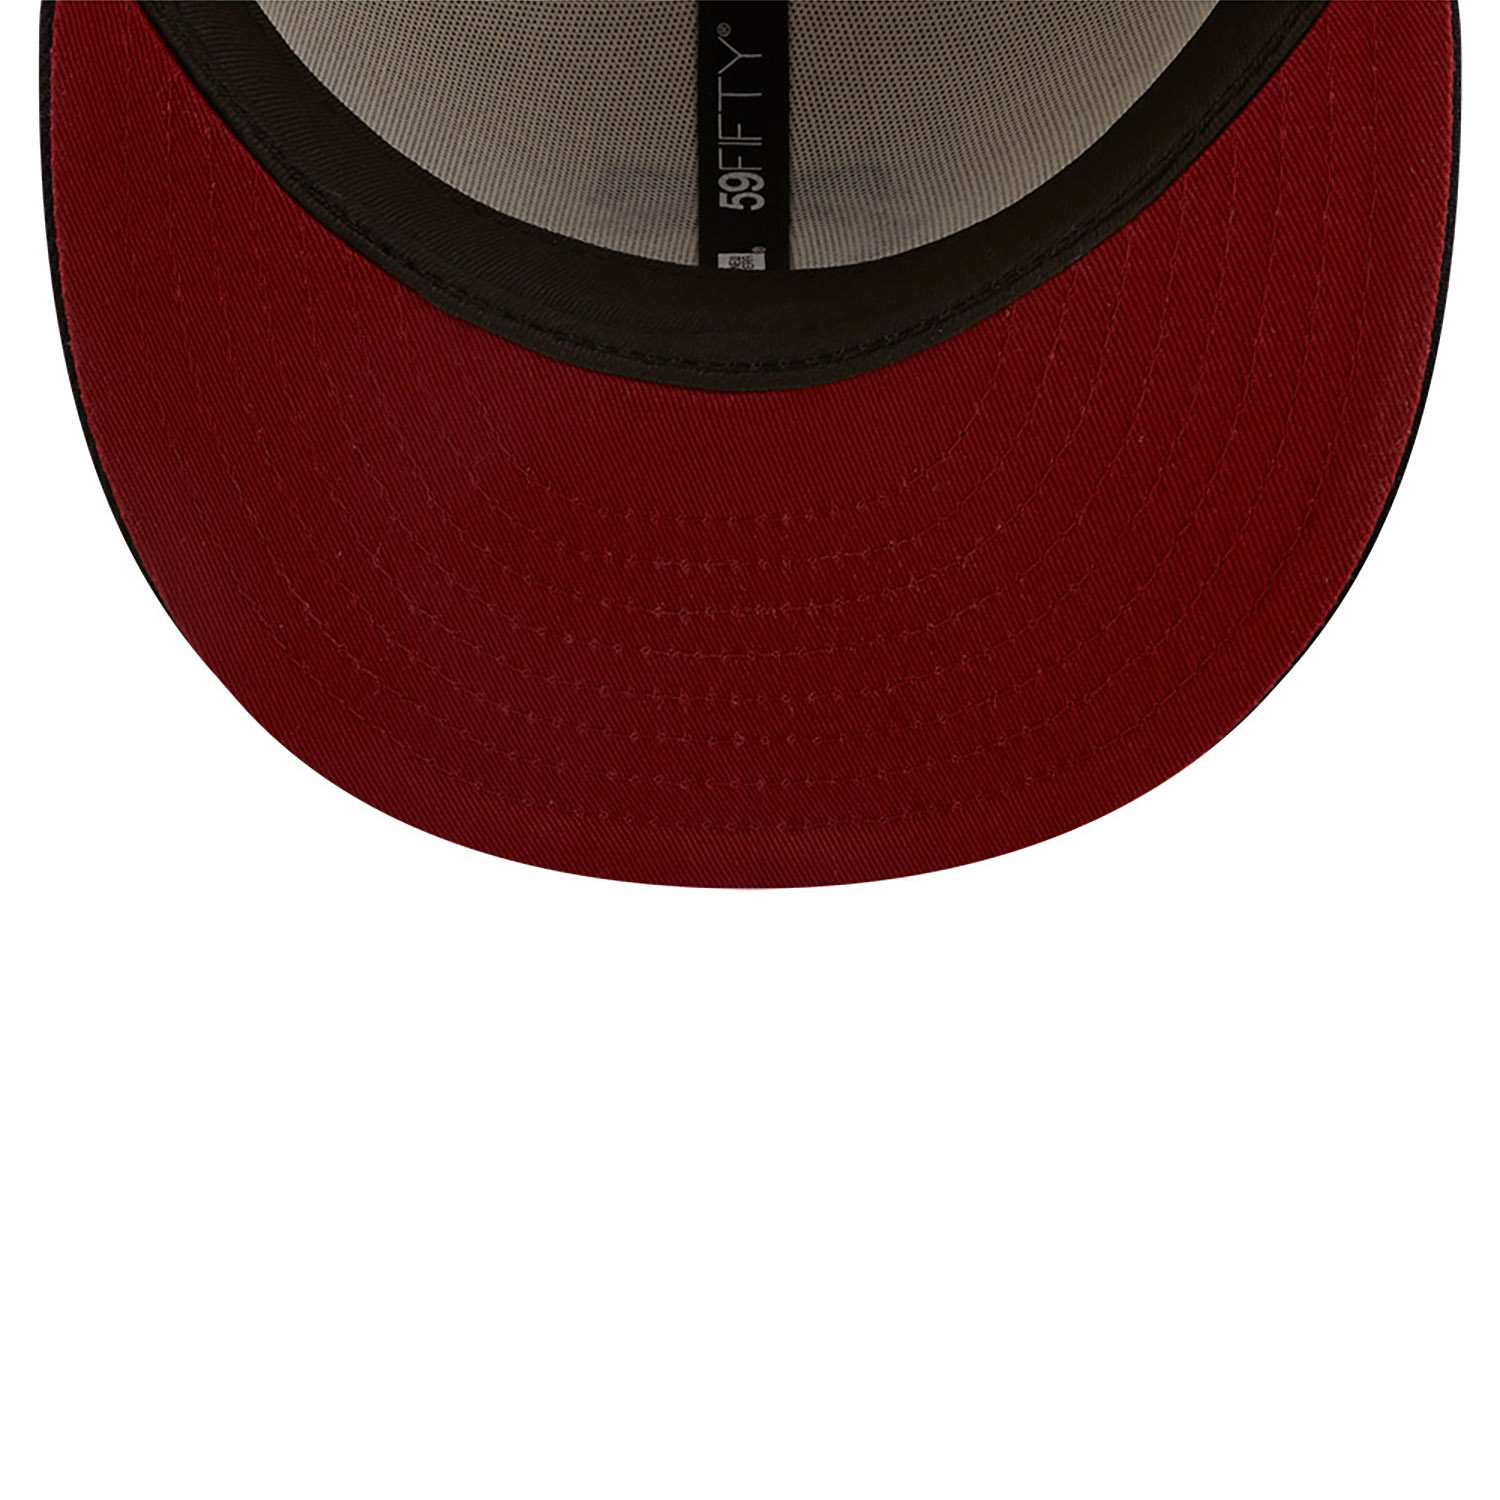 Minnesota Twins Fall Classic White 59FIFTY Fitted Cap